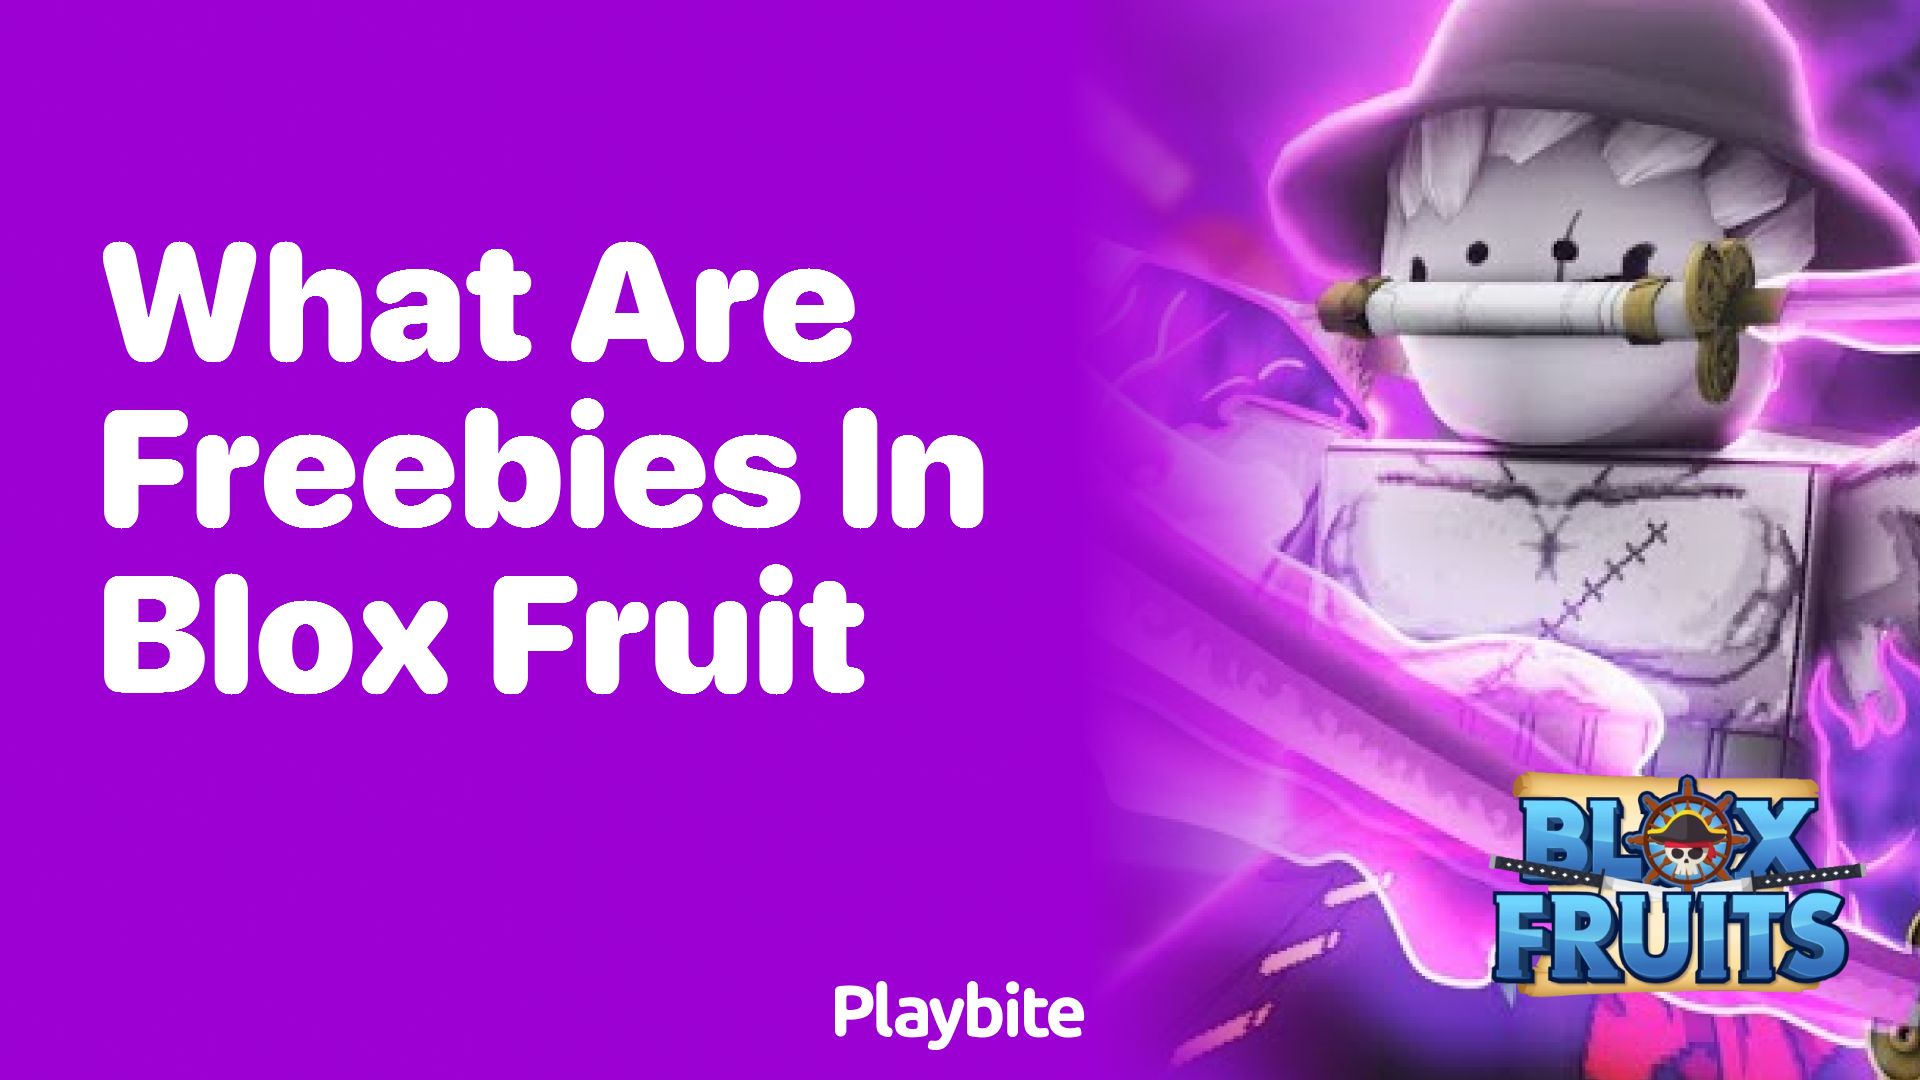 What Are Freebies in Blox Fruit? Unwrapping the Mystery